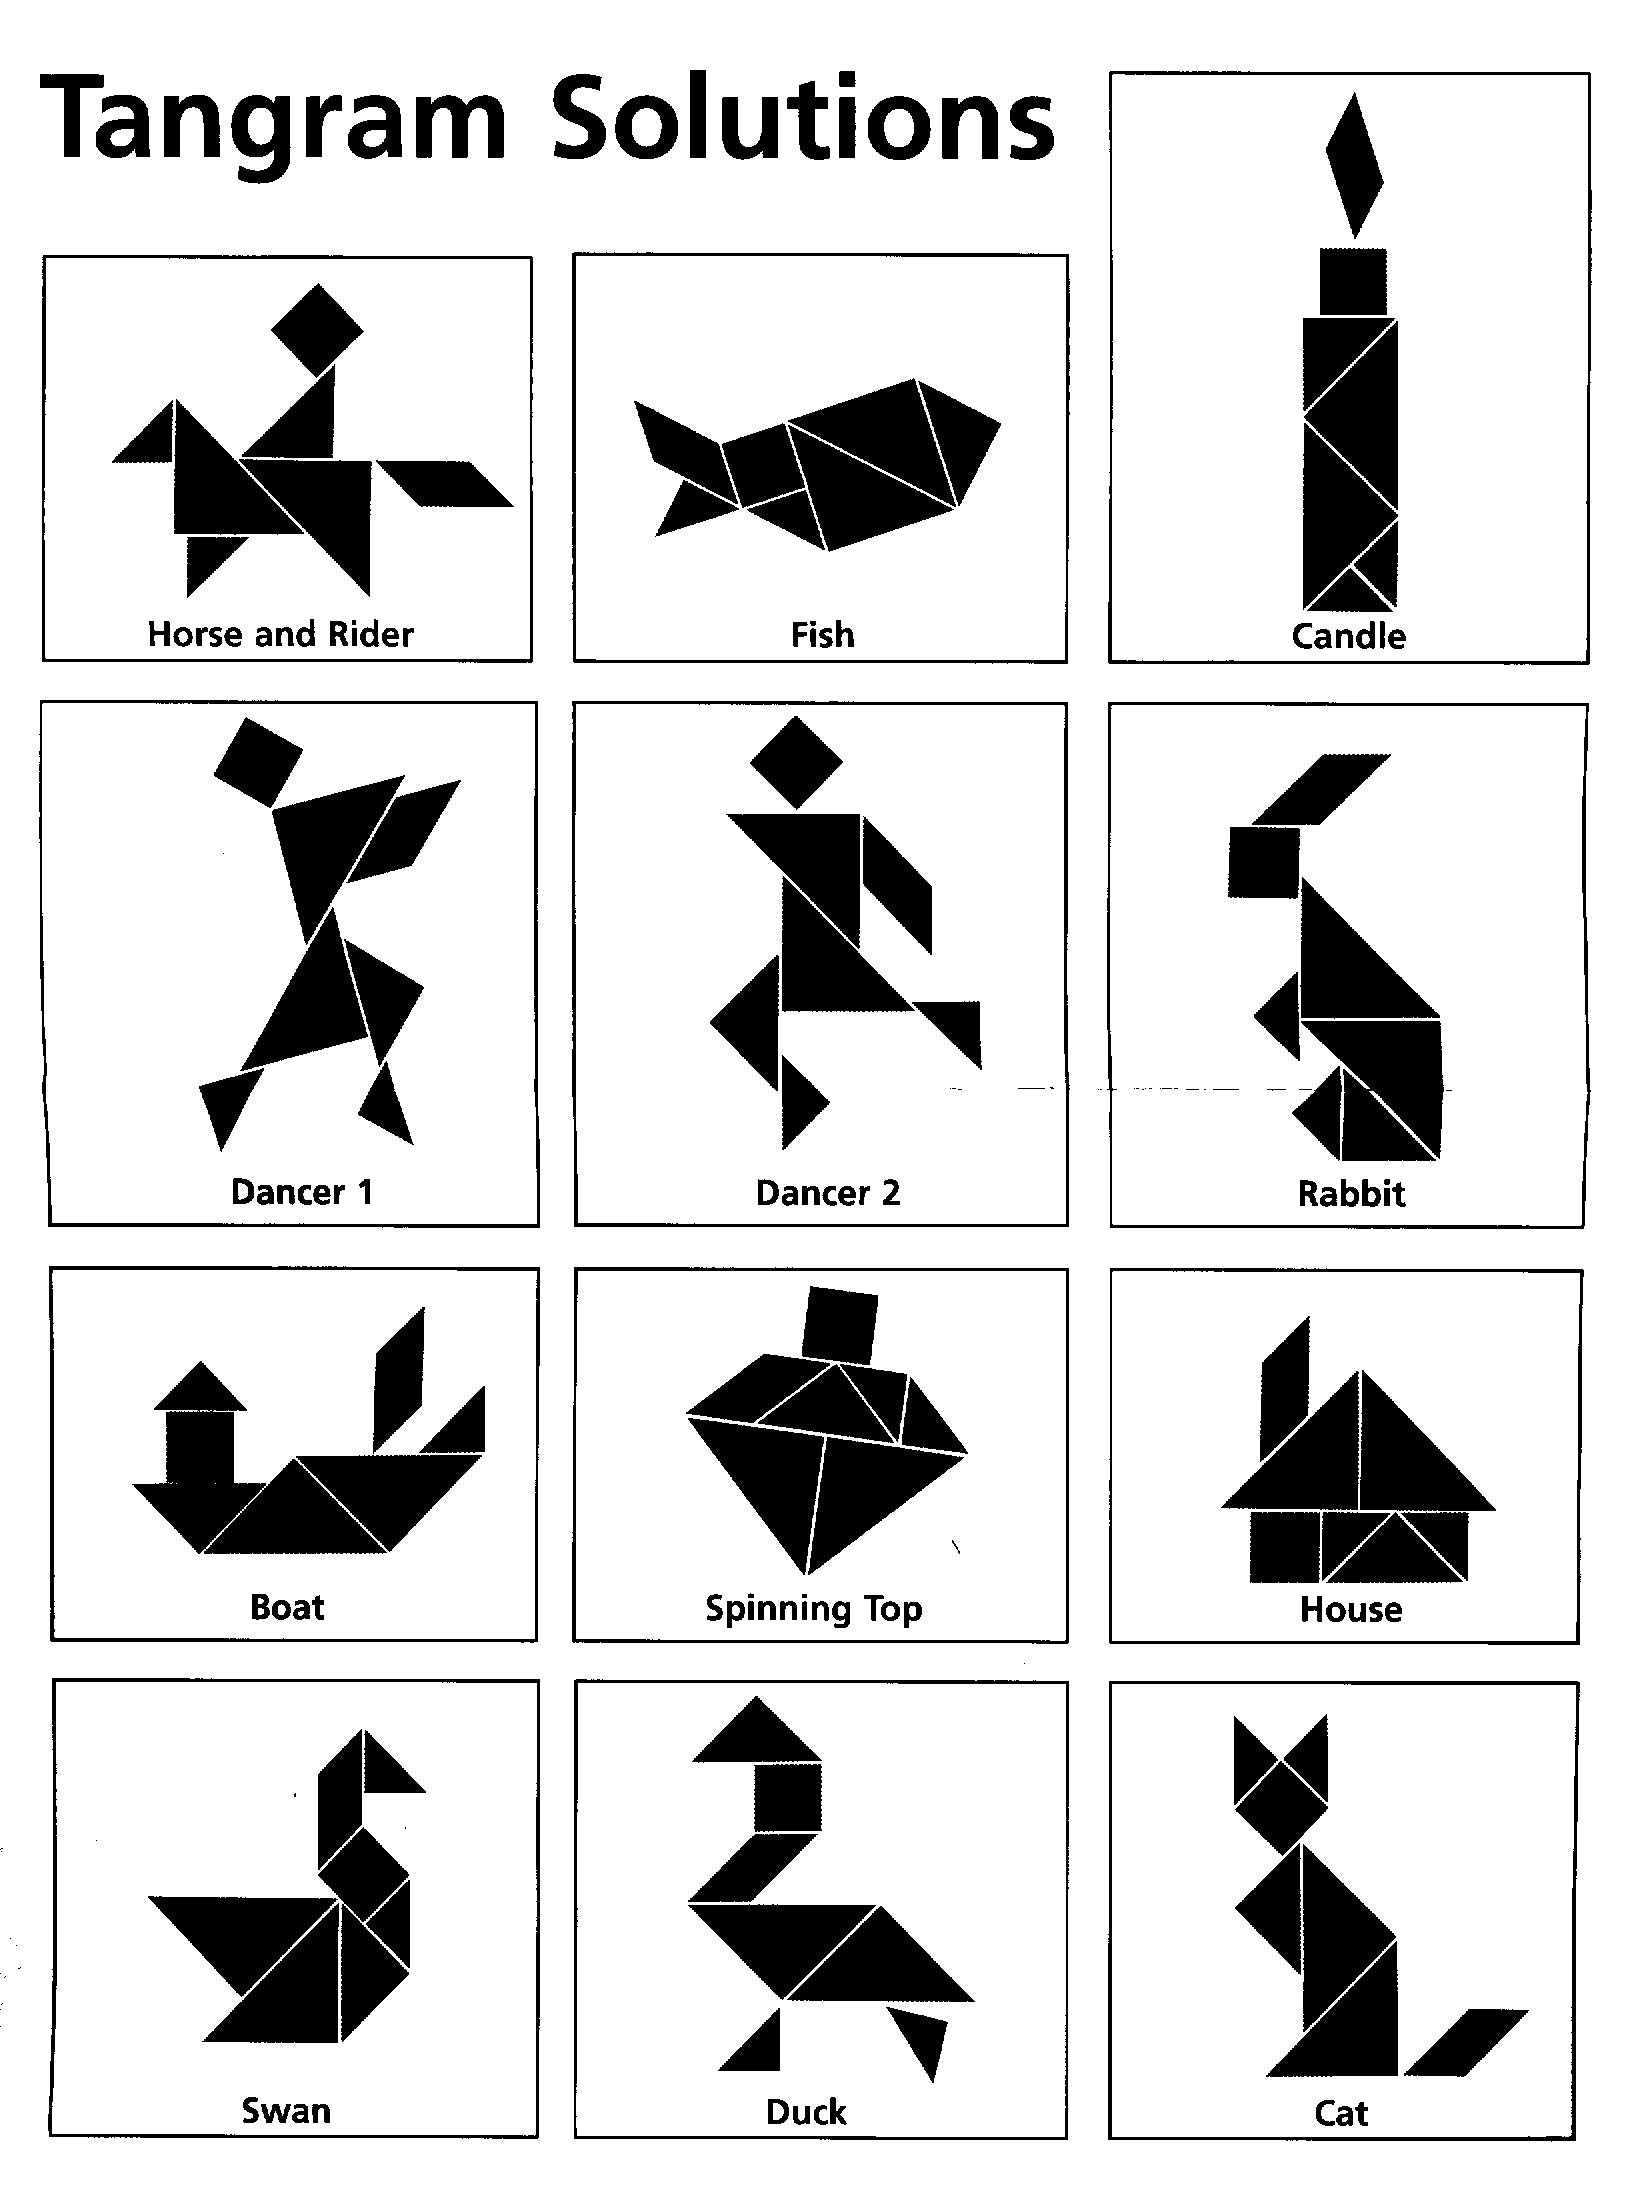 Tangram Puzzles and Solutions Image